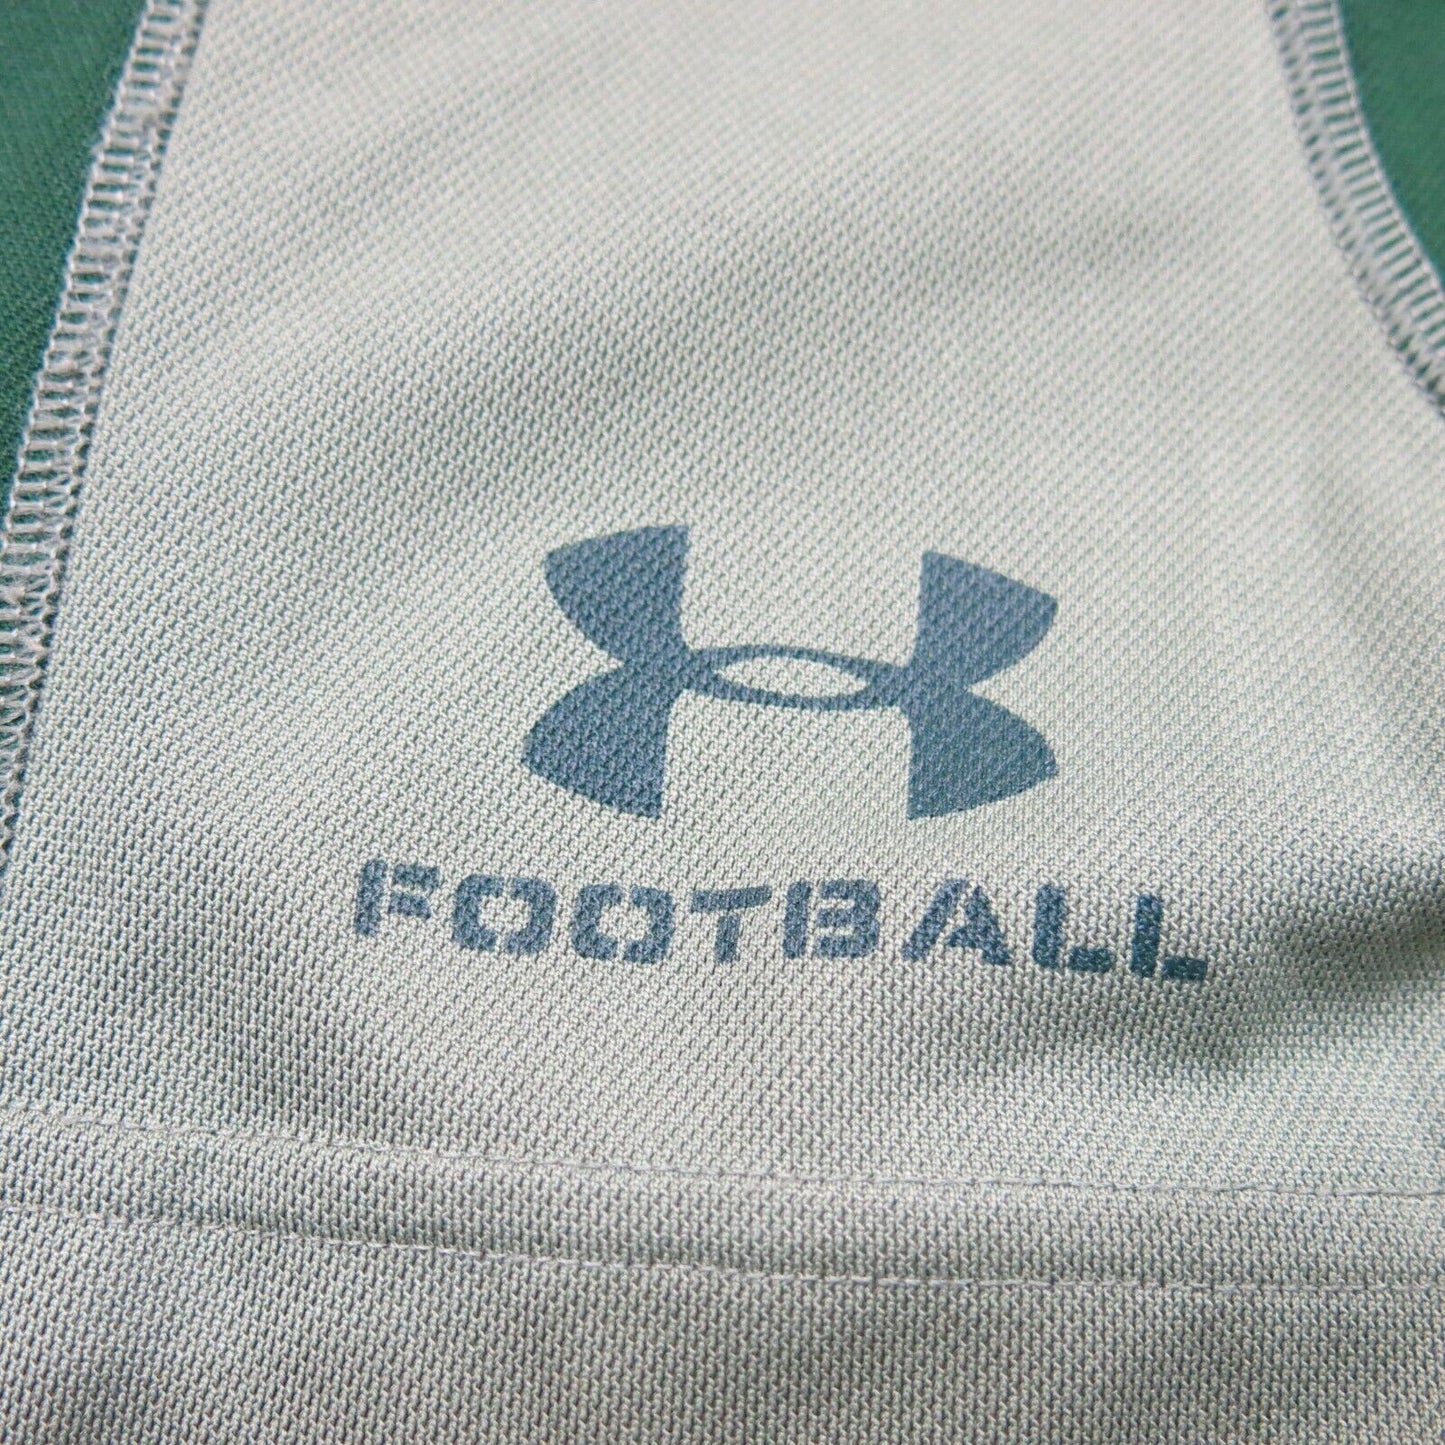 Under Armour Shorts Youth Size XL Green Solid Drawstring Waist Athletic Football